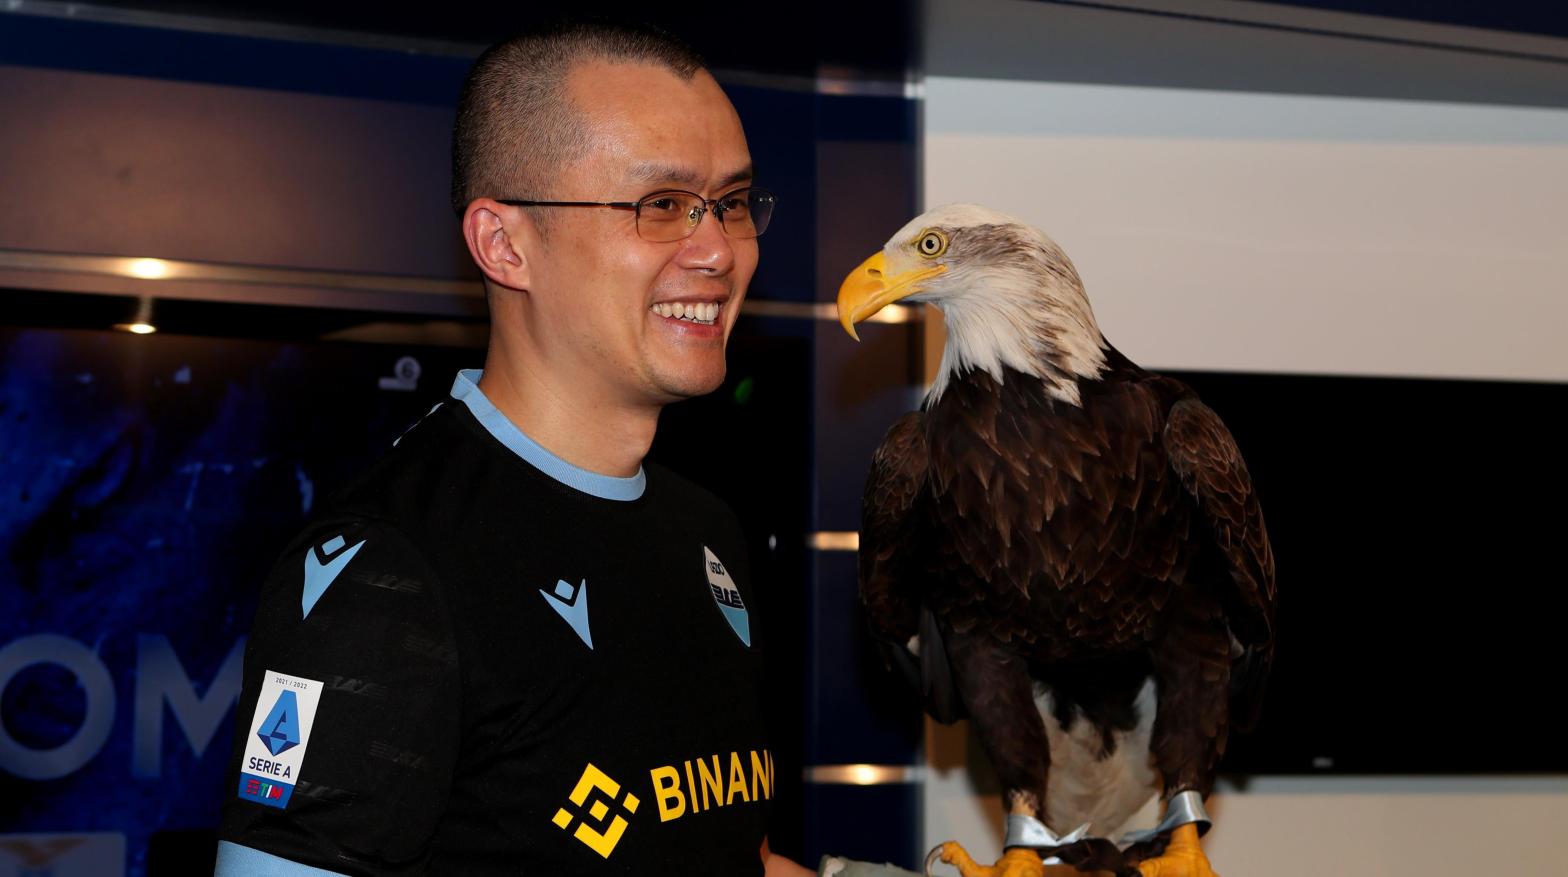 Binance CEO Changpeng Zhao poses with SS Lazio eagle mascotte Olimpia during the visit at Formello Sport centre in Rome, Italy.  (Photo: Paolo Bruno, Getty Images)